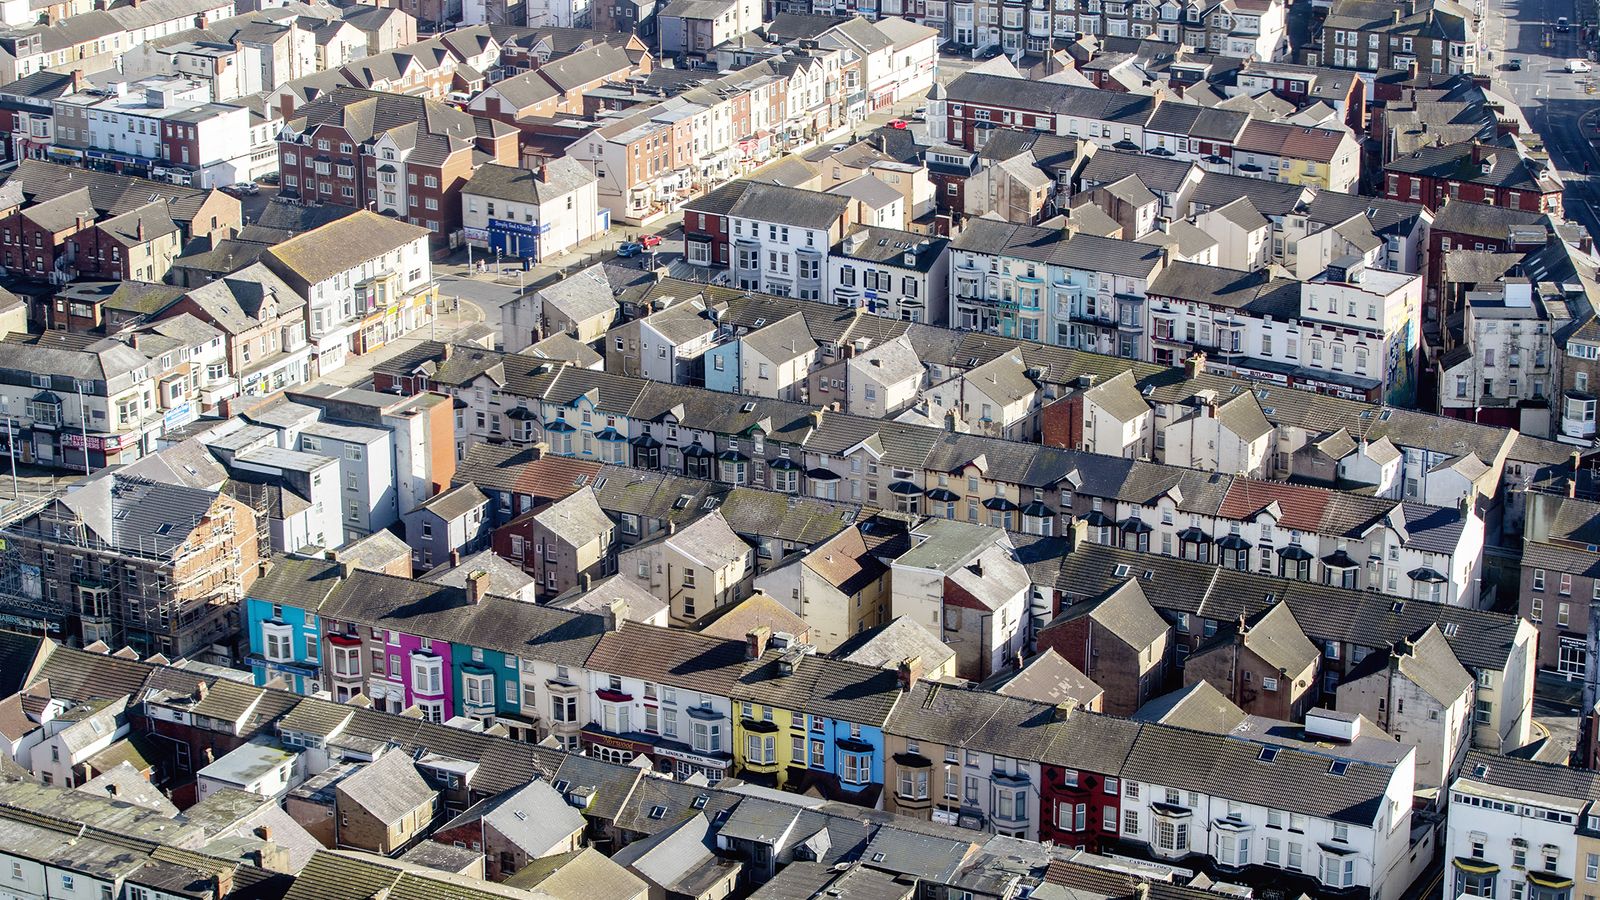 No extra help for households struggling with mortgage payments, says Rishi Sunak